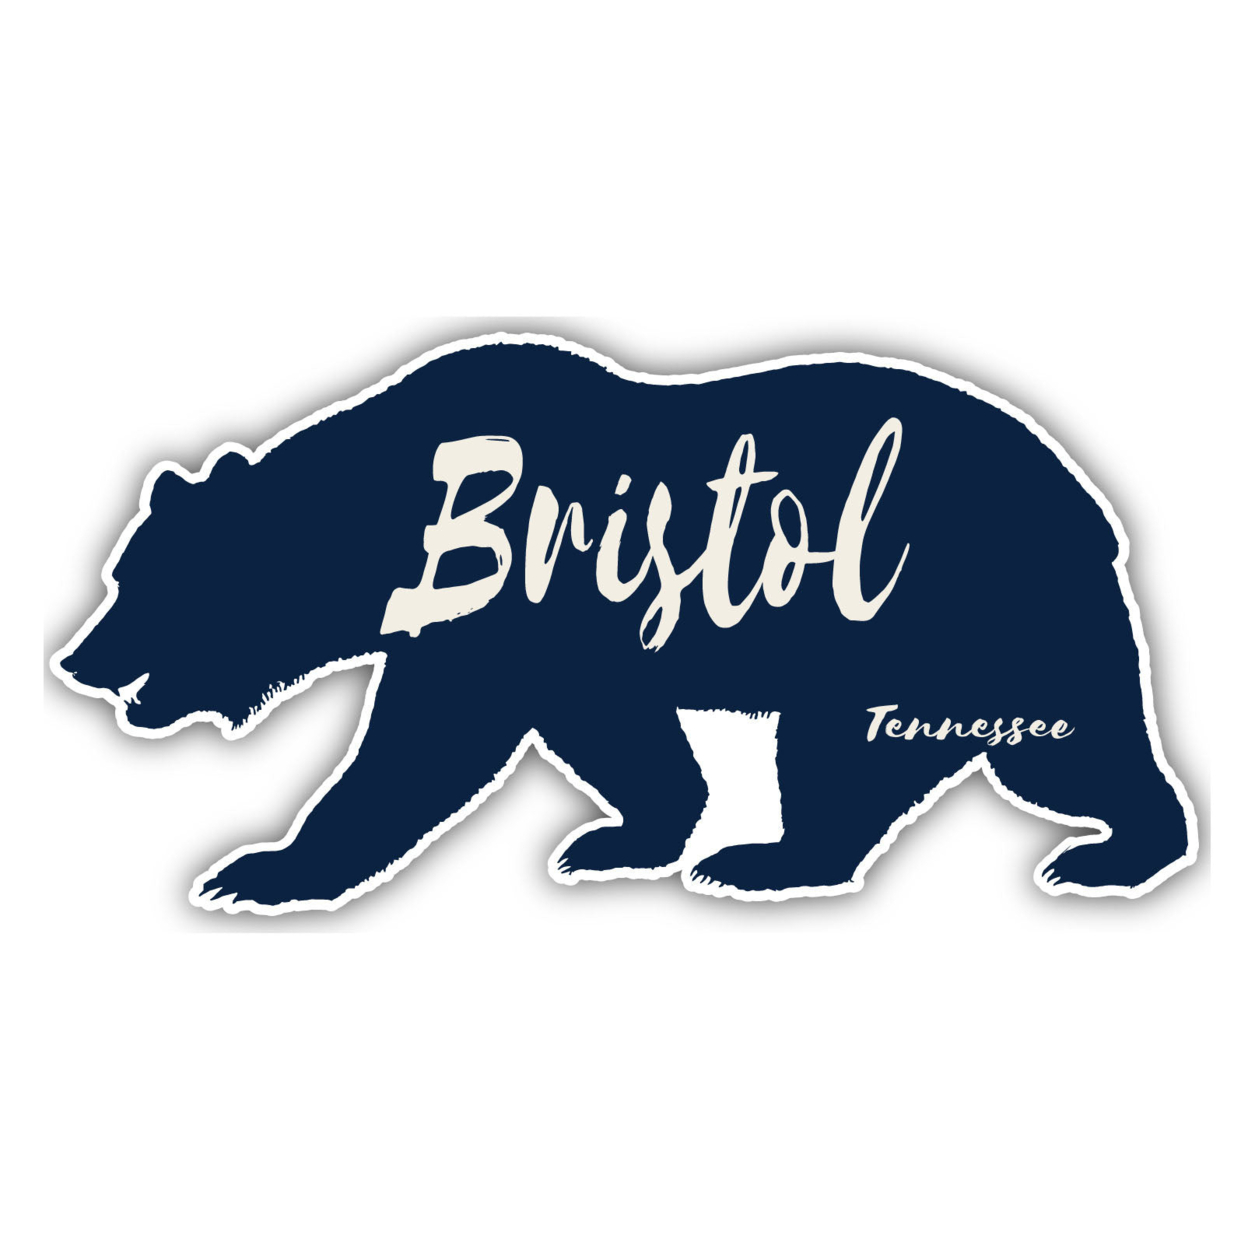 Bristol Tennessee Souvenir Decorative Stickers (Choose Theme And Size) - 4-Pack, 6-Inch, Tent